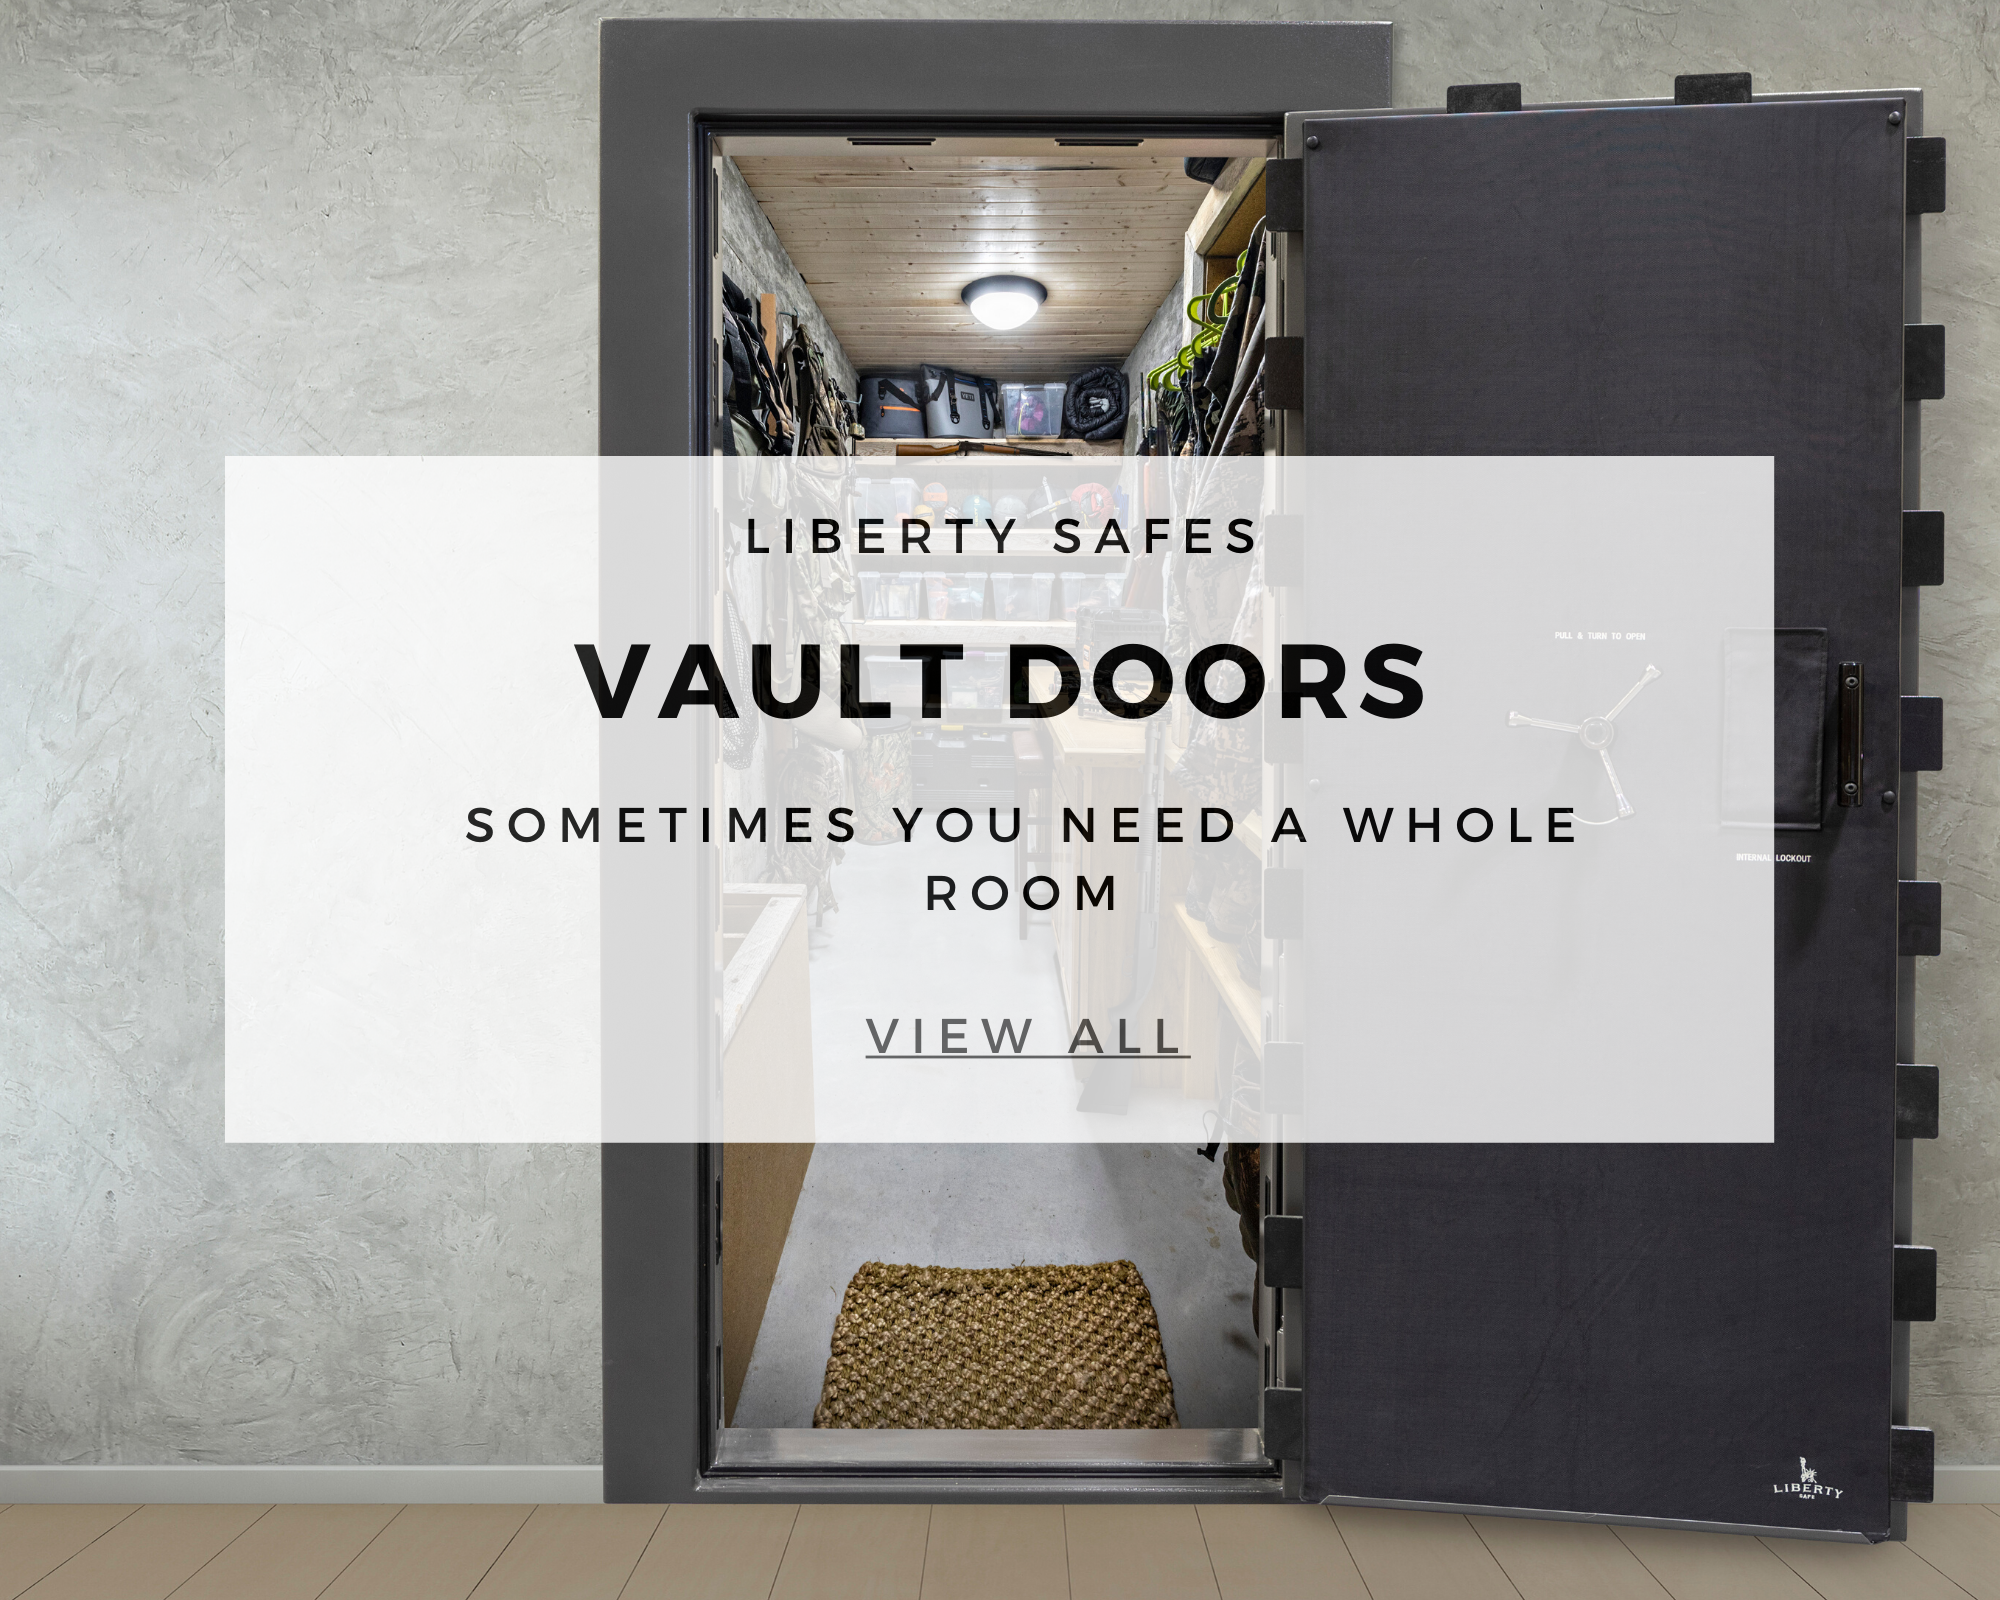 Vault Doors Sometimes you need a whole room